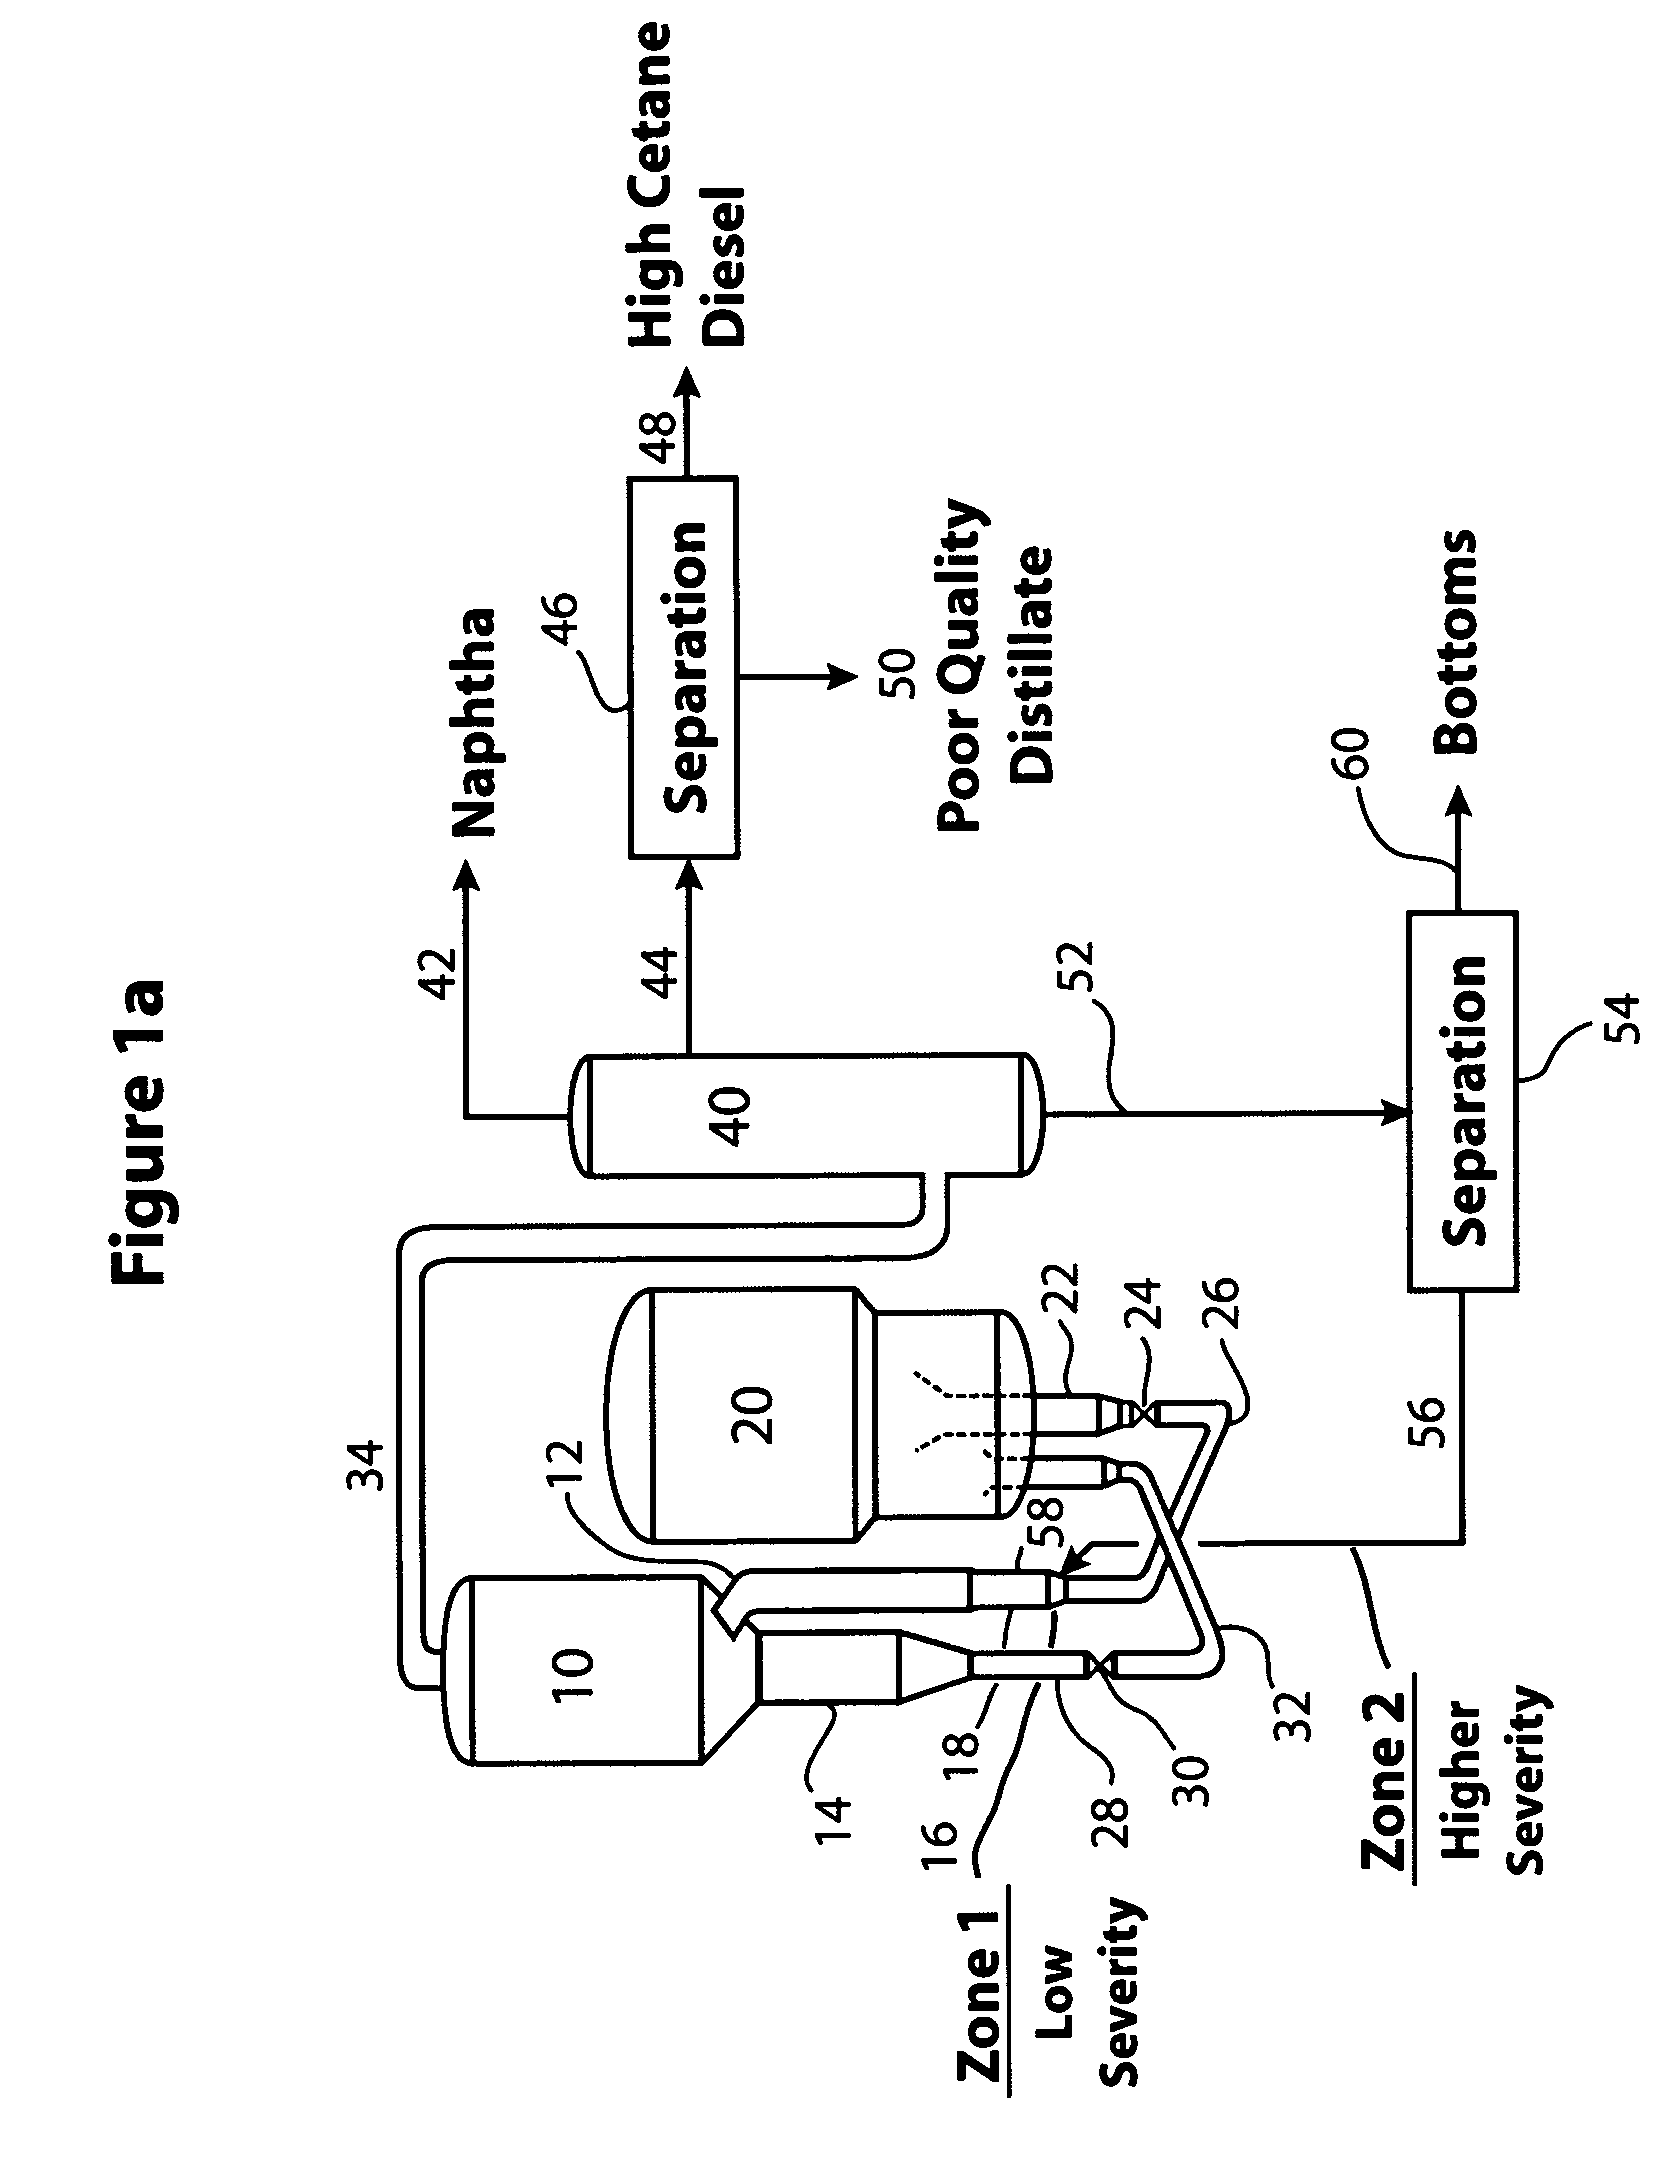 FCC process combining molecular separation with staged conversion